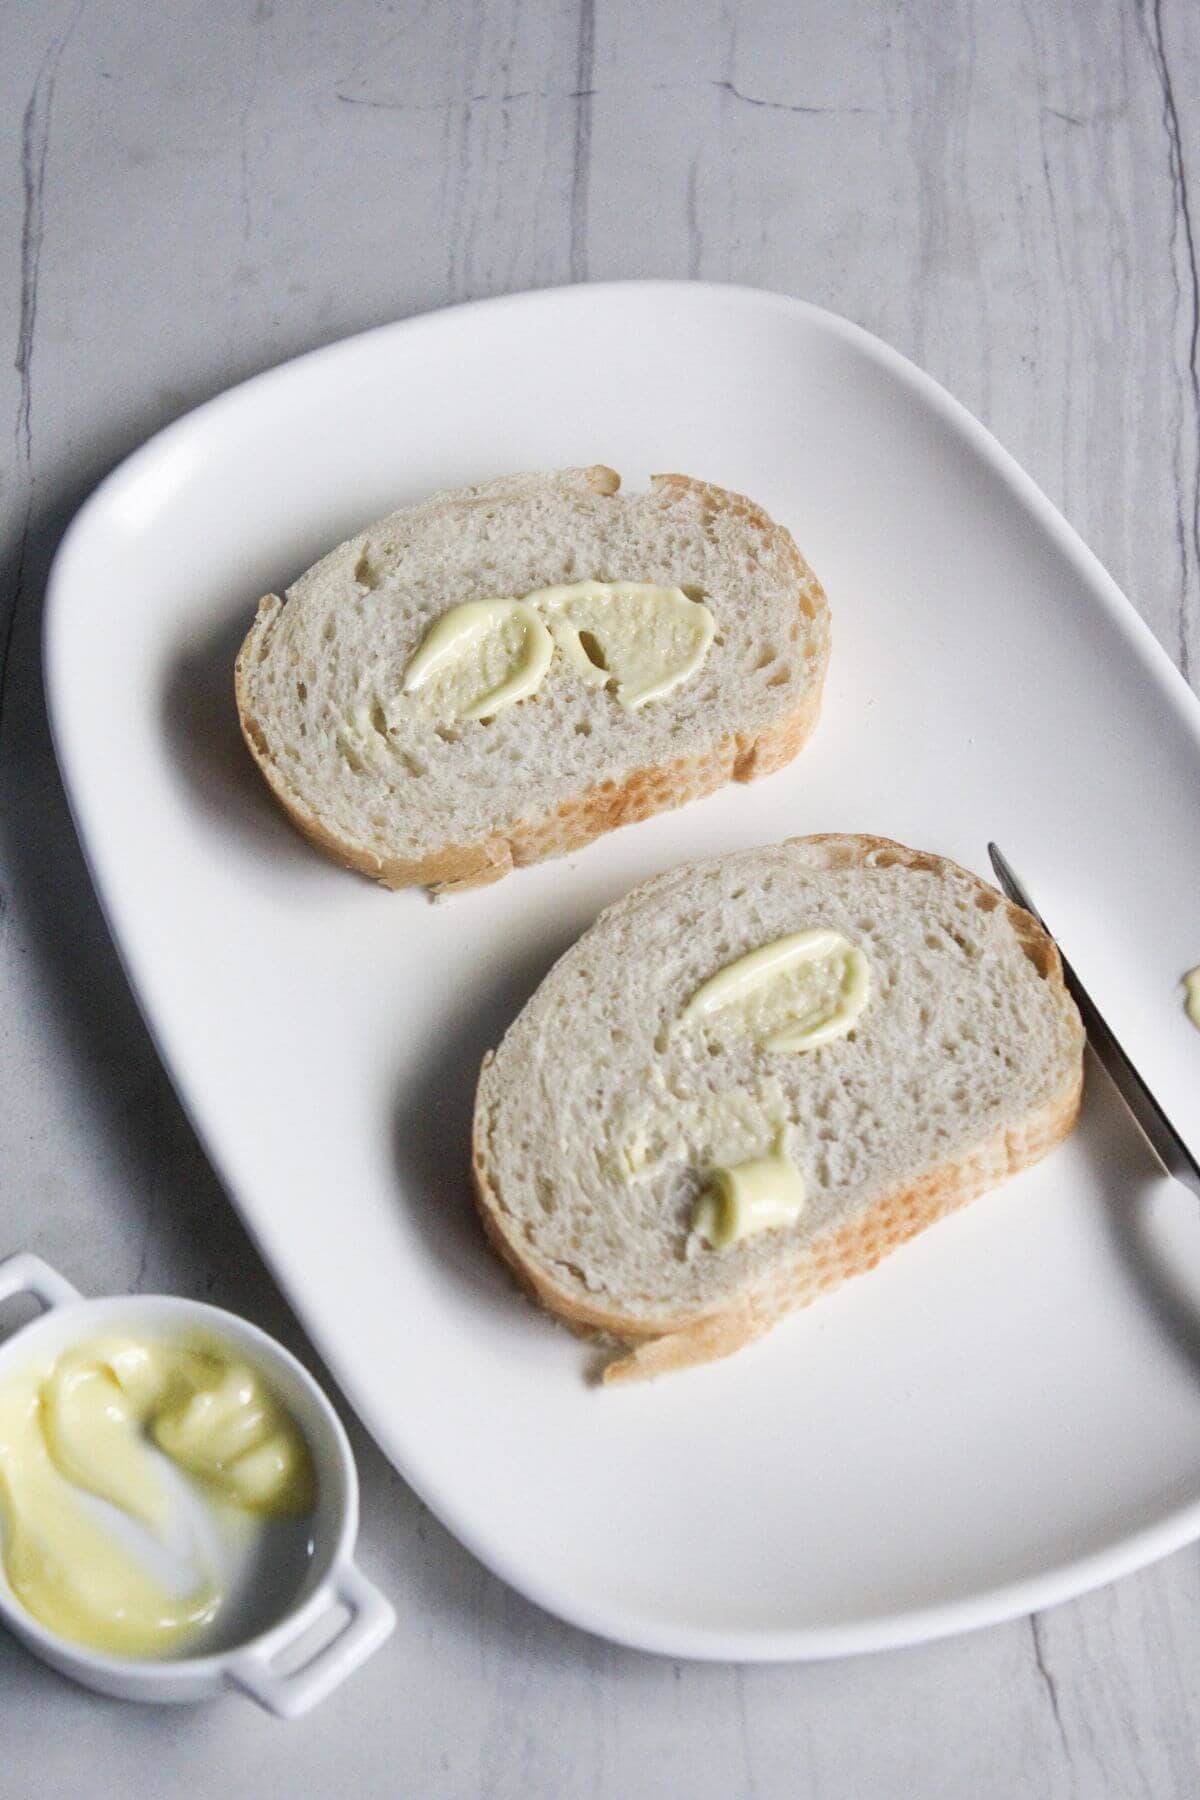 Two slices of bread with a dollop of mayonnaise on a white plate.